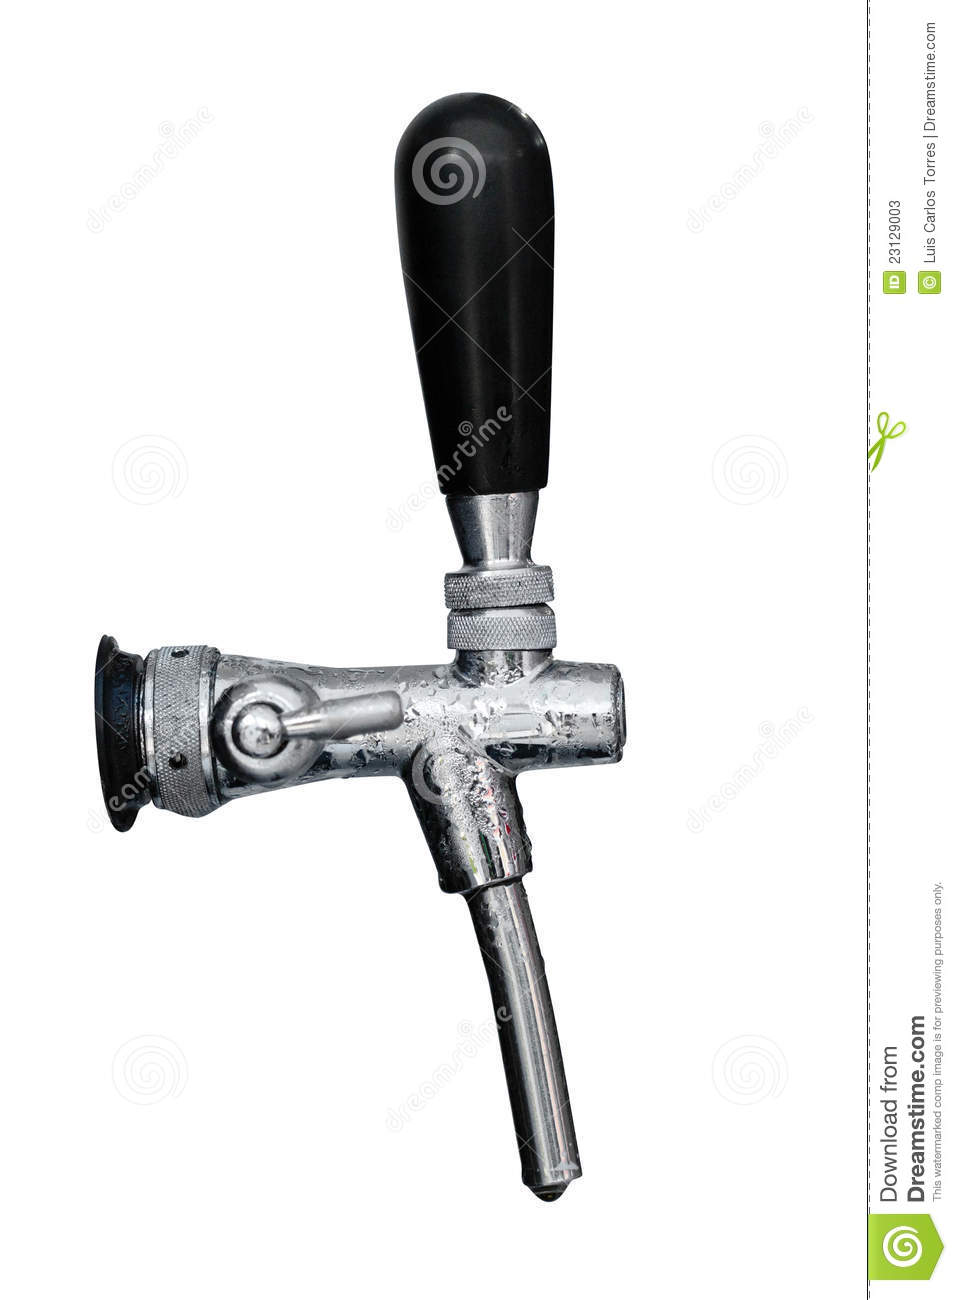 Beer Tap Stock Photos   Image  23129003